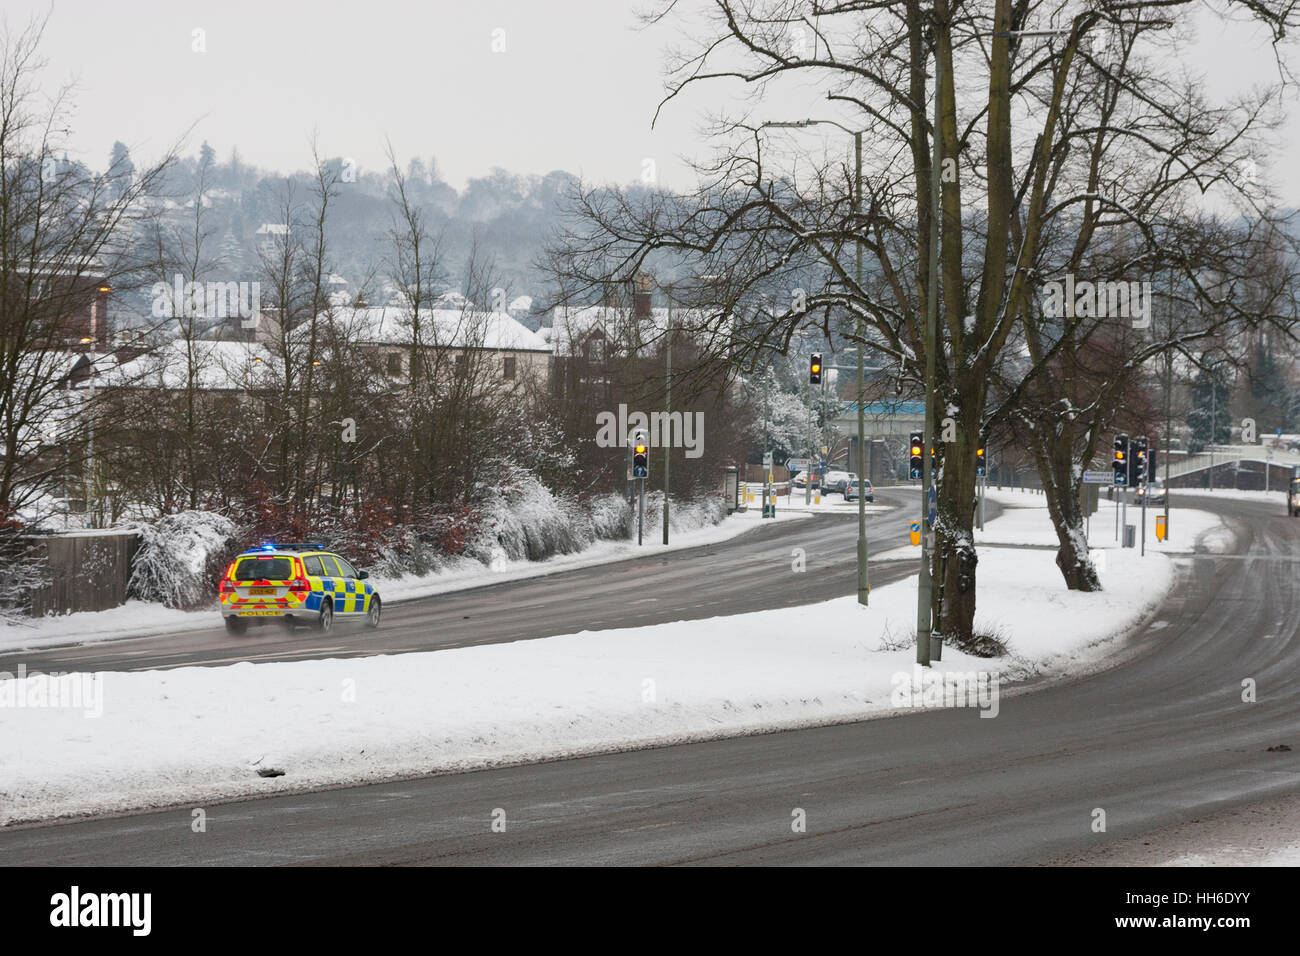 SURREY, UK A police car responds to an emergency call in the snow. Stock Photo